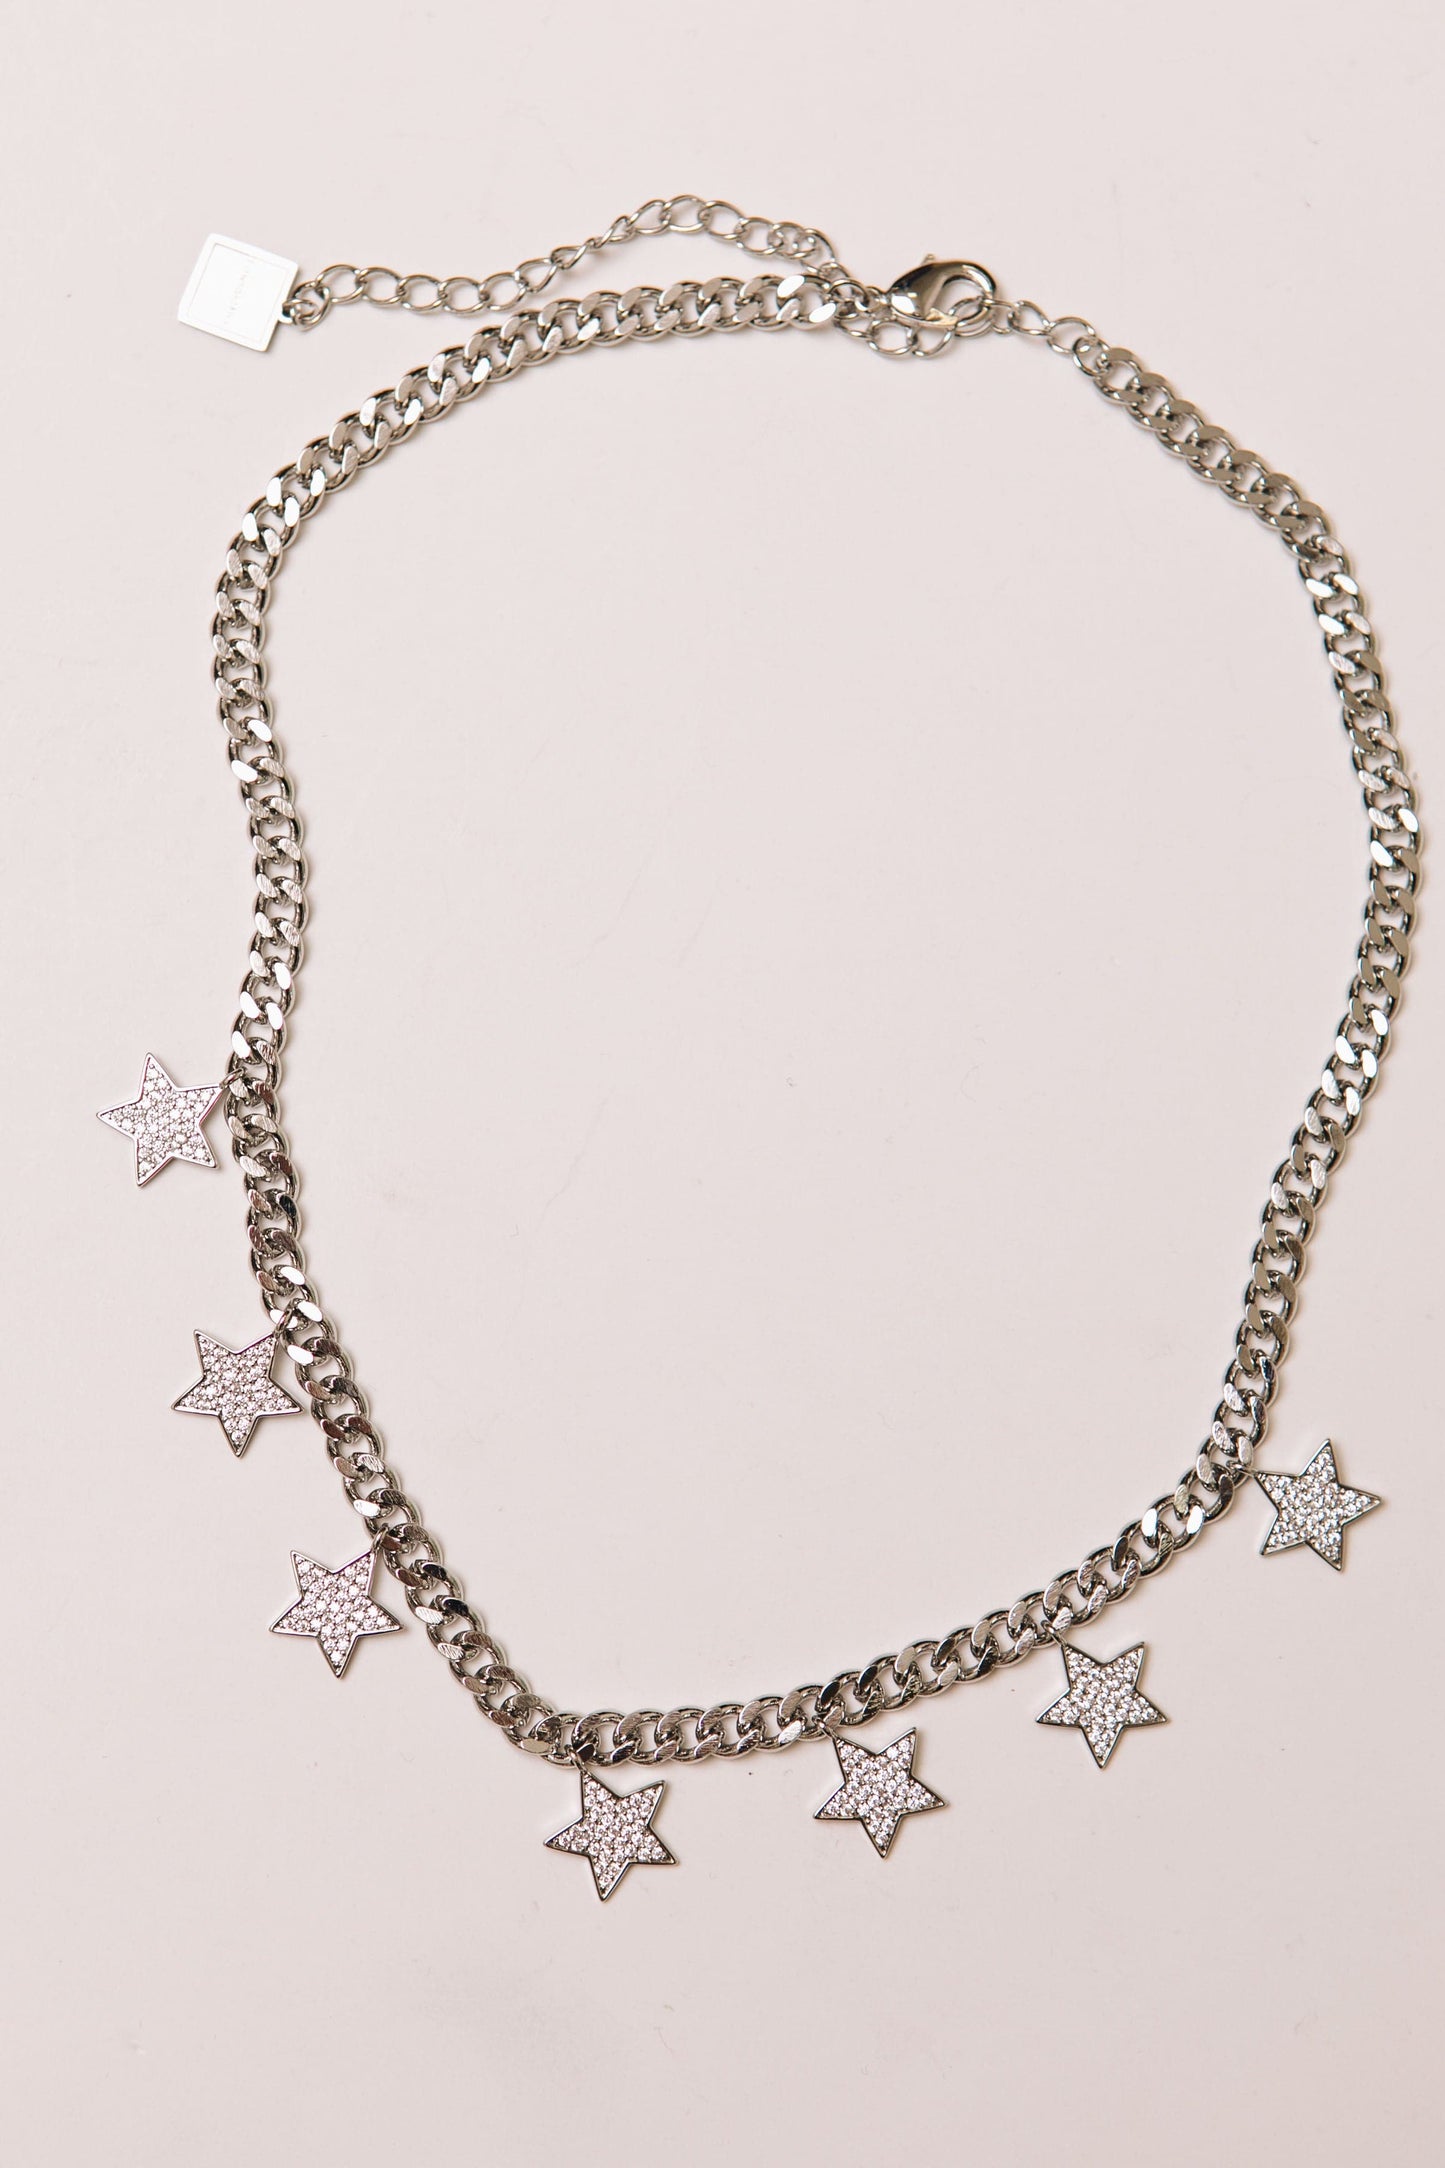 EXOI Custom Wish Upon a Star Necklace